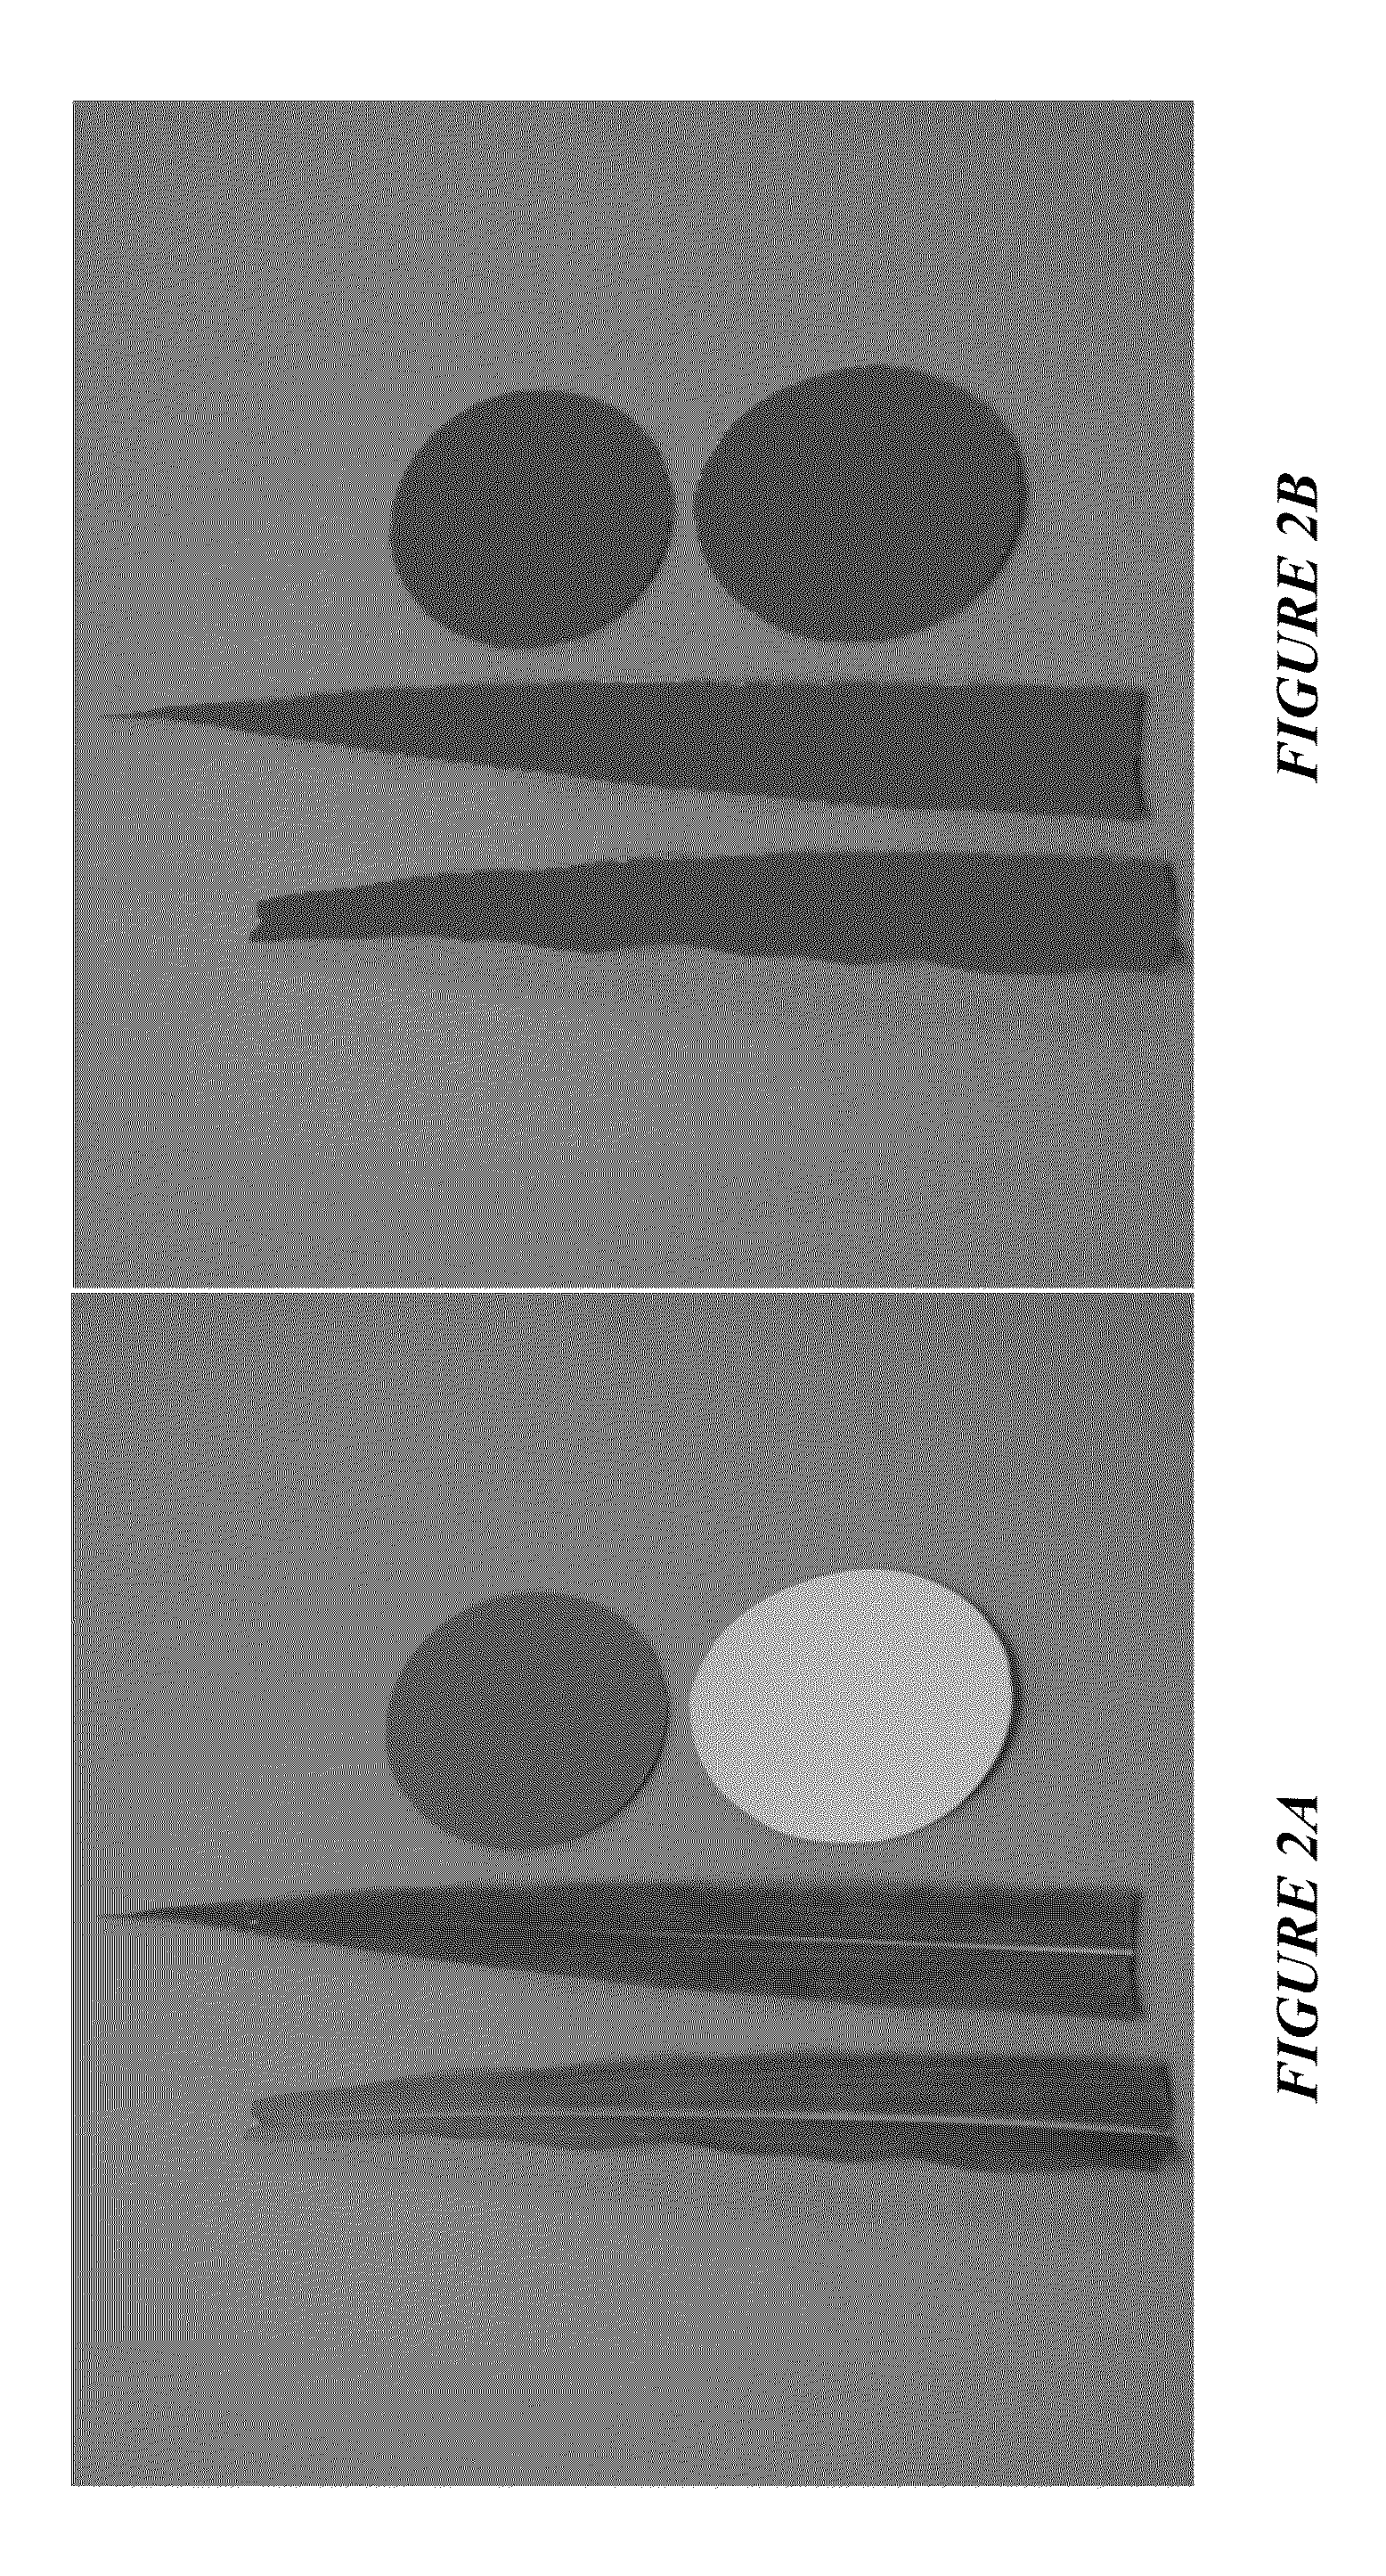 System and method of in-season nitrogen measurement and fertilization of non-leguminous crops from digital image analysis